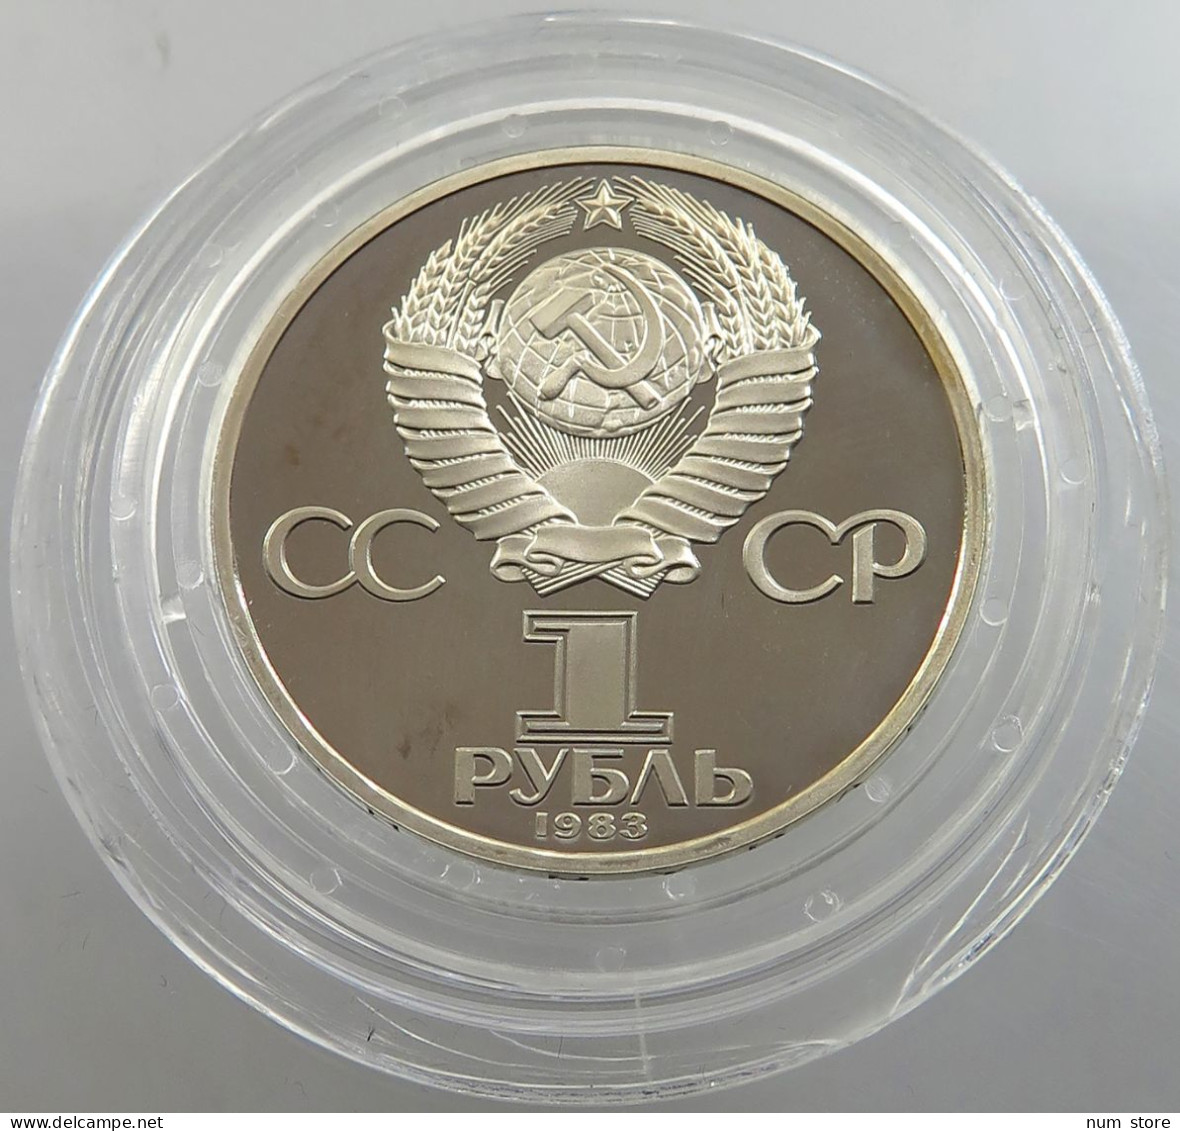 RUSSIA USSR 1 ROUBLE 1983 WITHOUT 1988 ON EDGE MARX PROOF #sm14 0335 - Russland